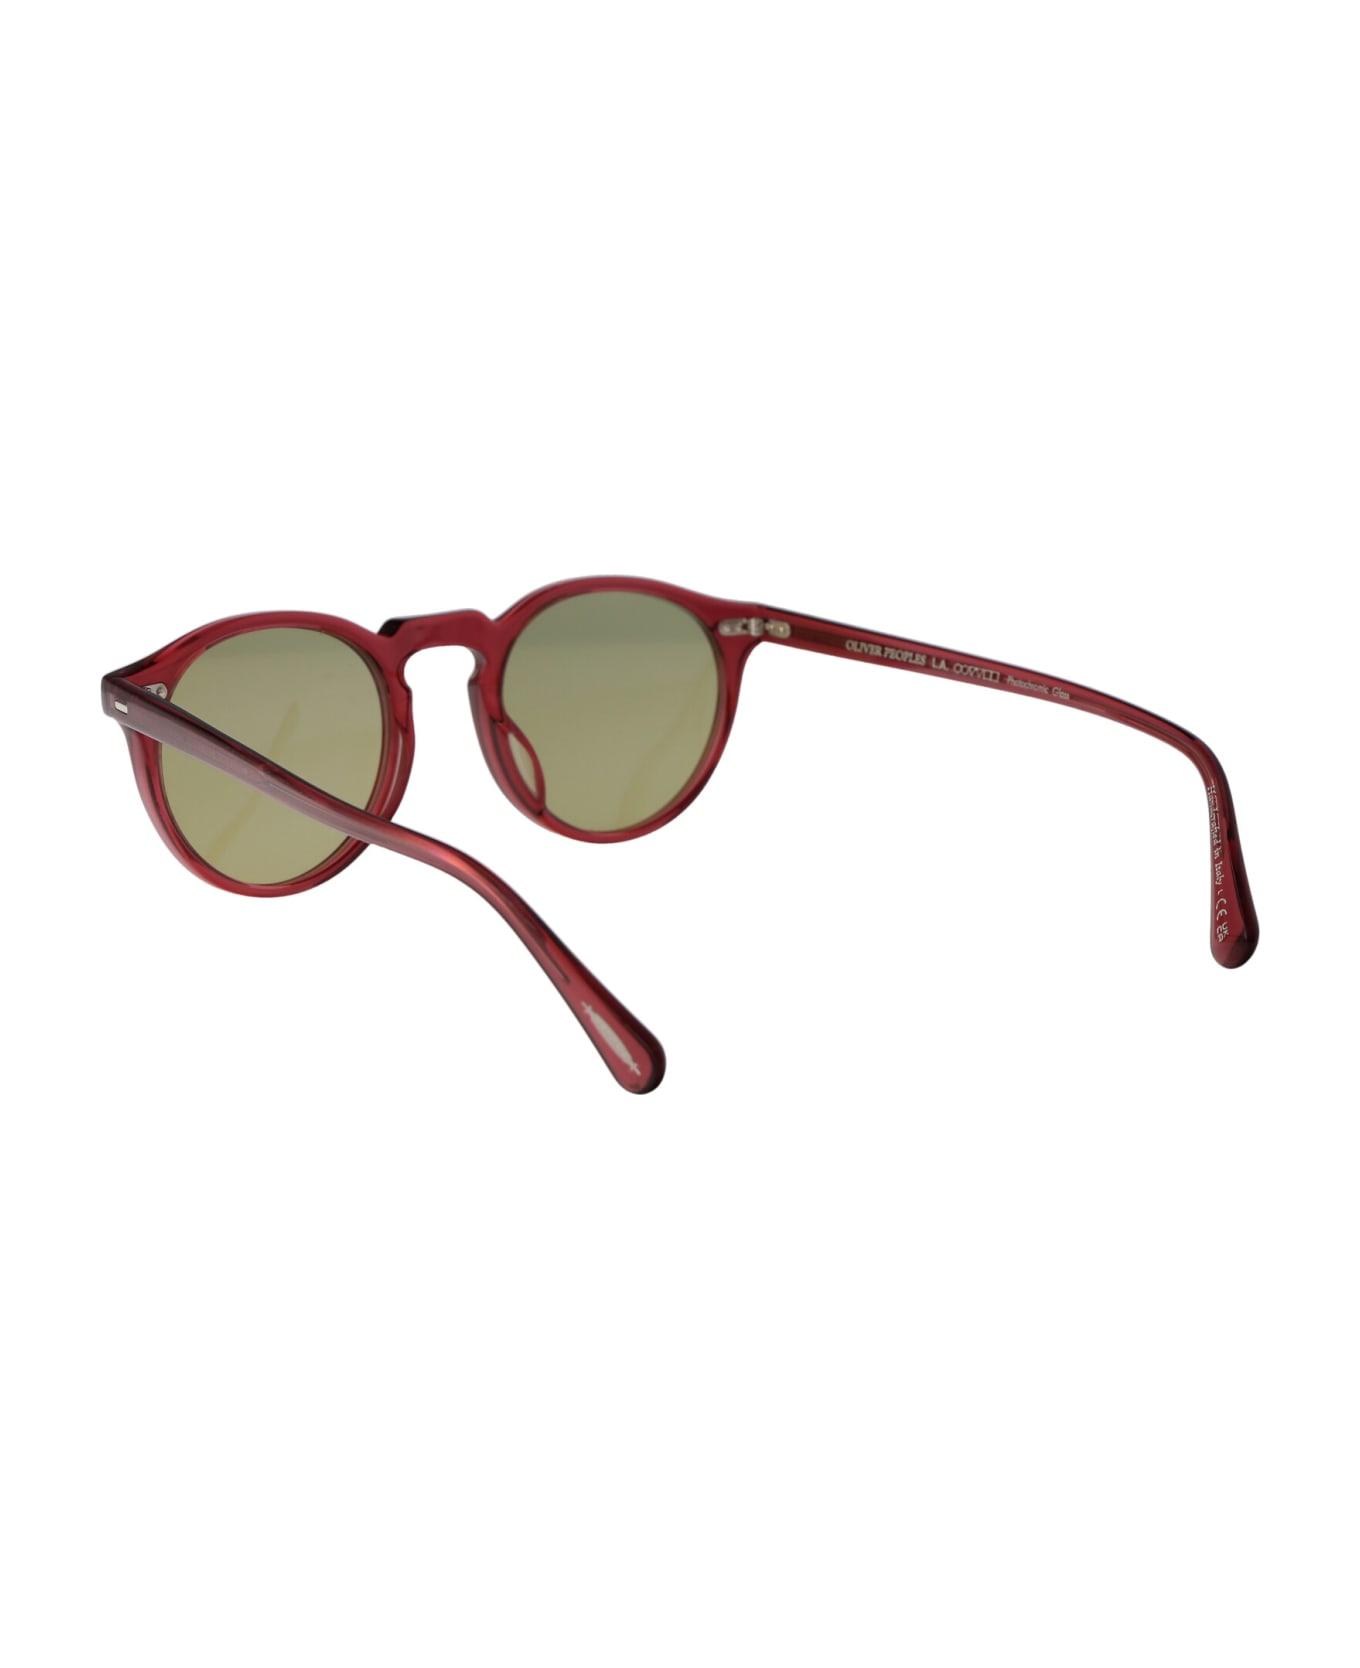 Oliver Peoples Gregory Peck Sun Sunglasses - 17644Montblanc tortoise-shell square sunglasses